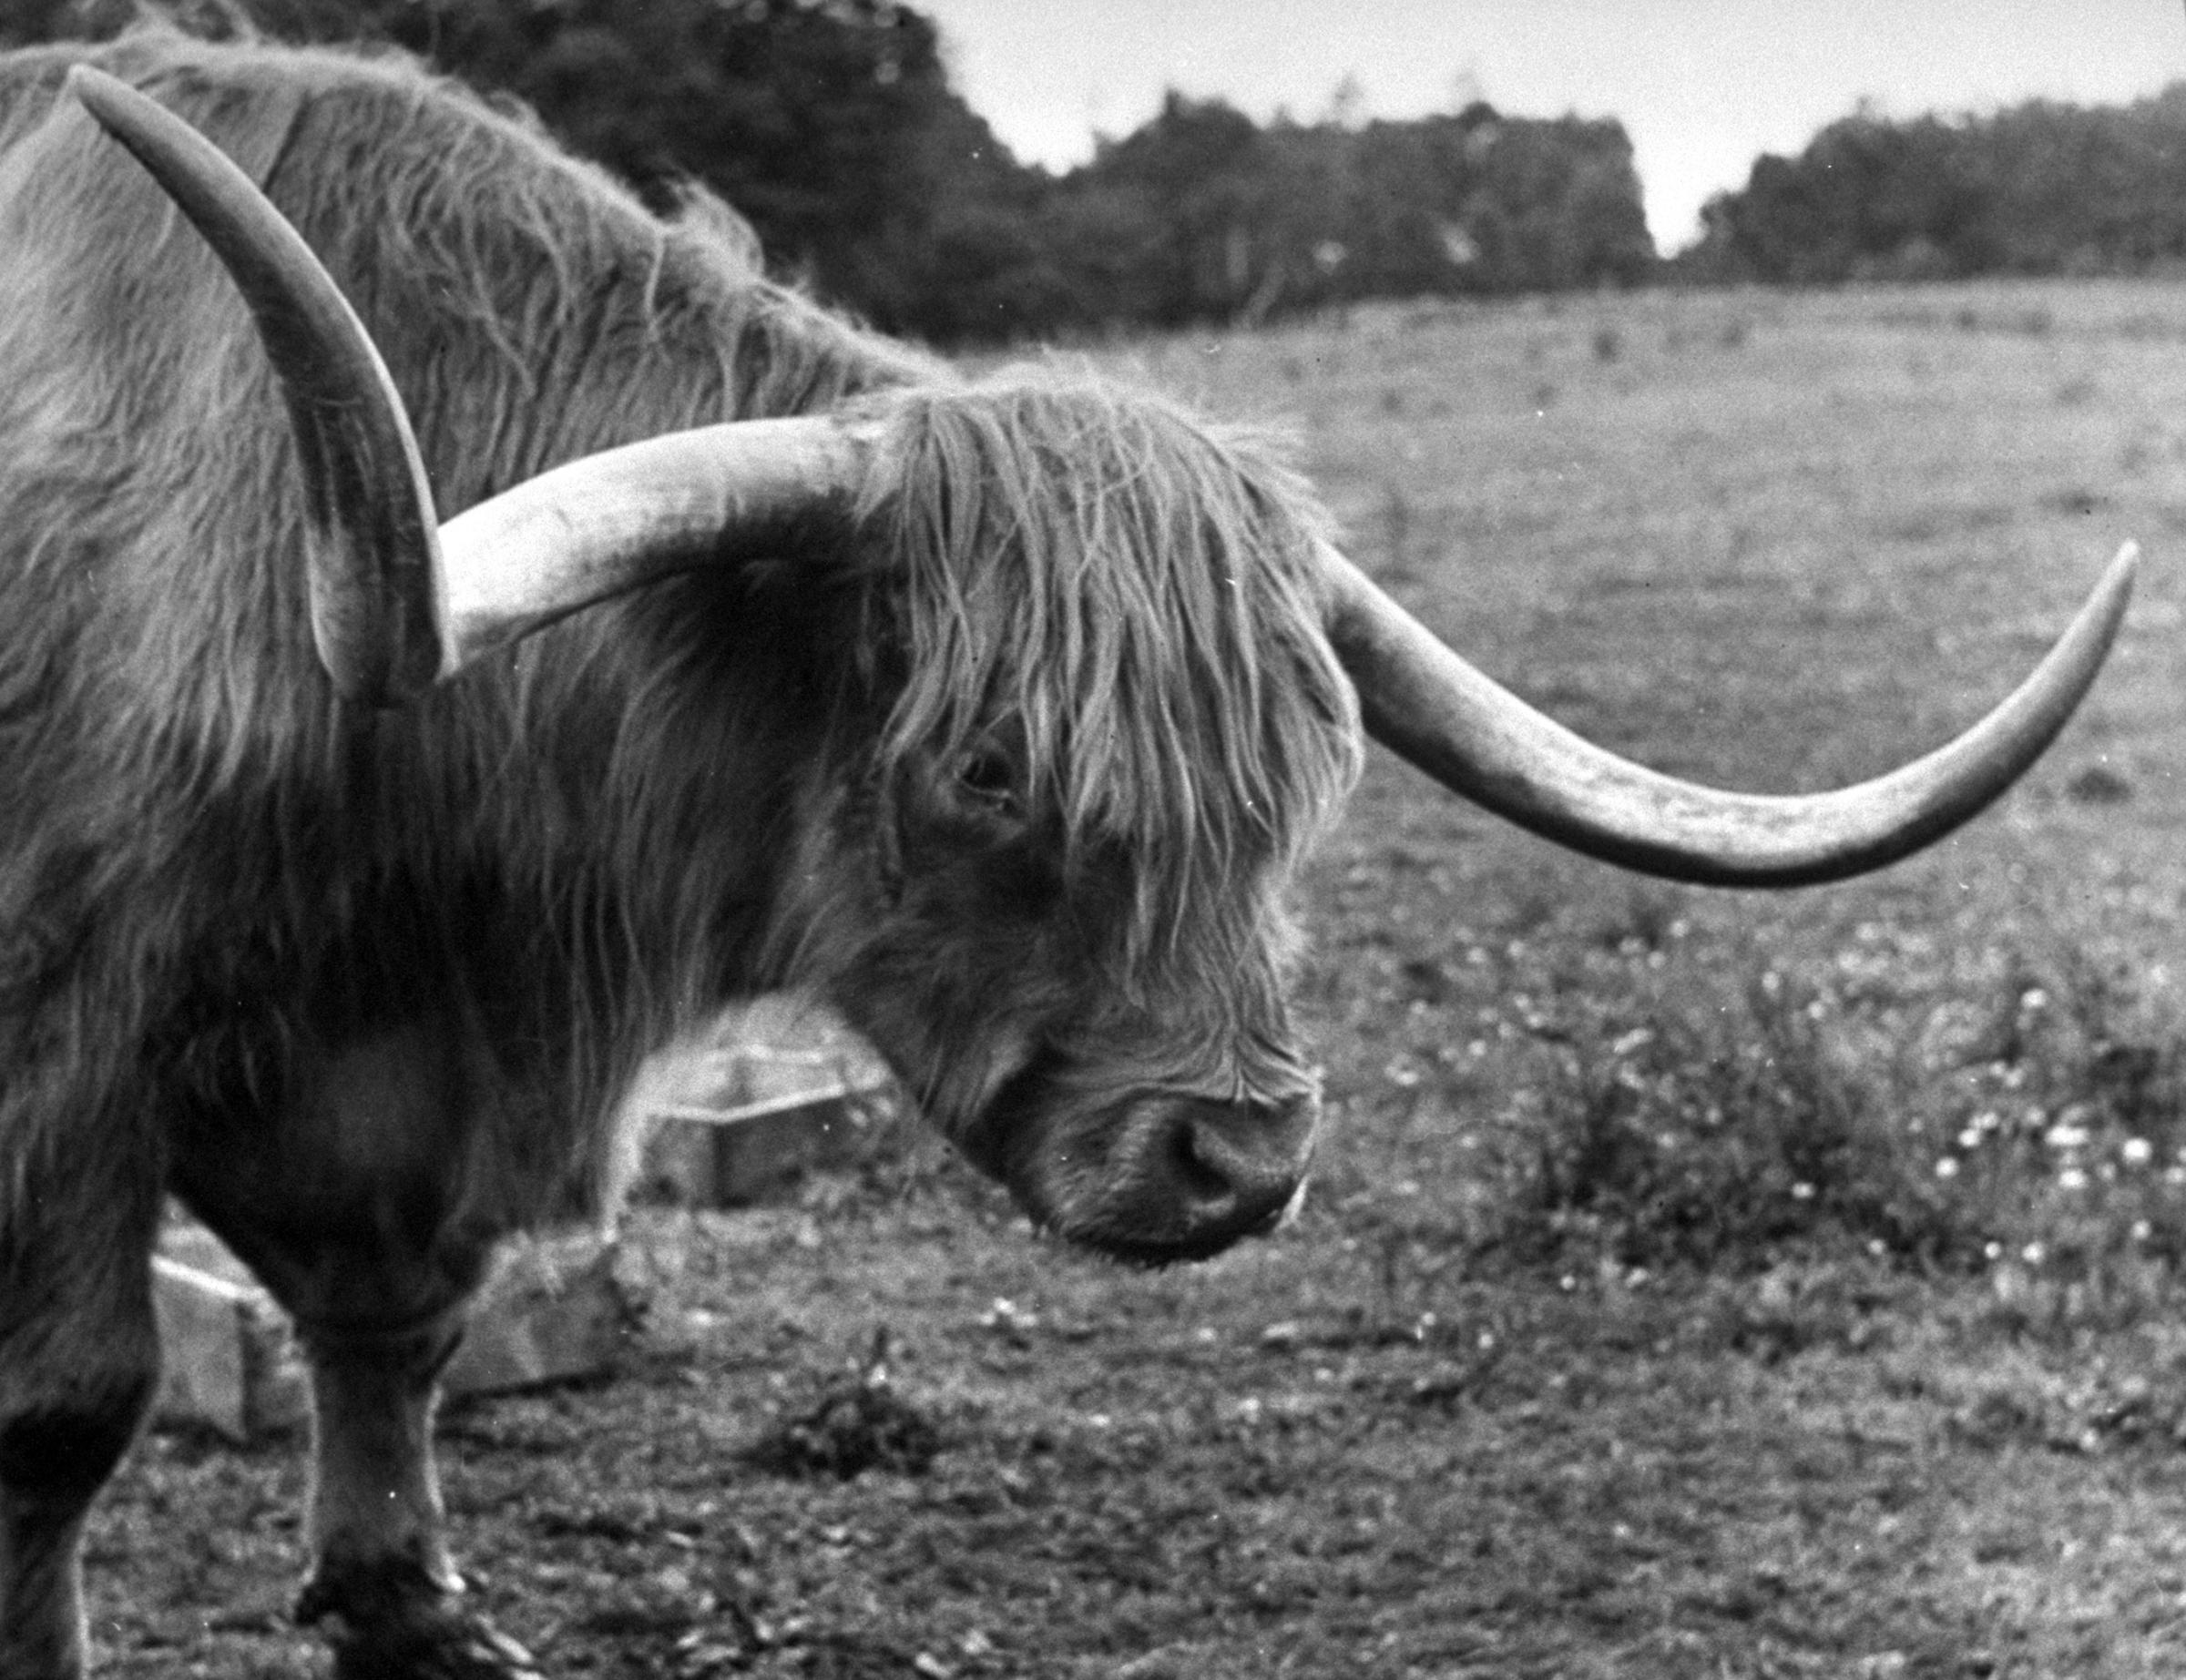 A champion steer standing in a pasture, Scotland 1947.